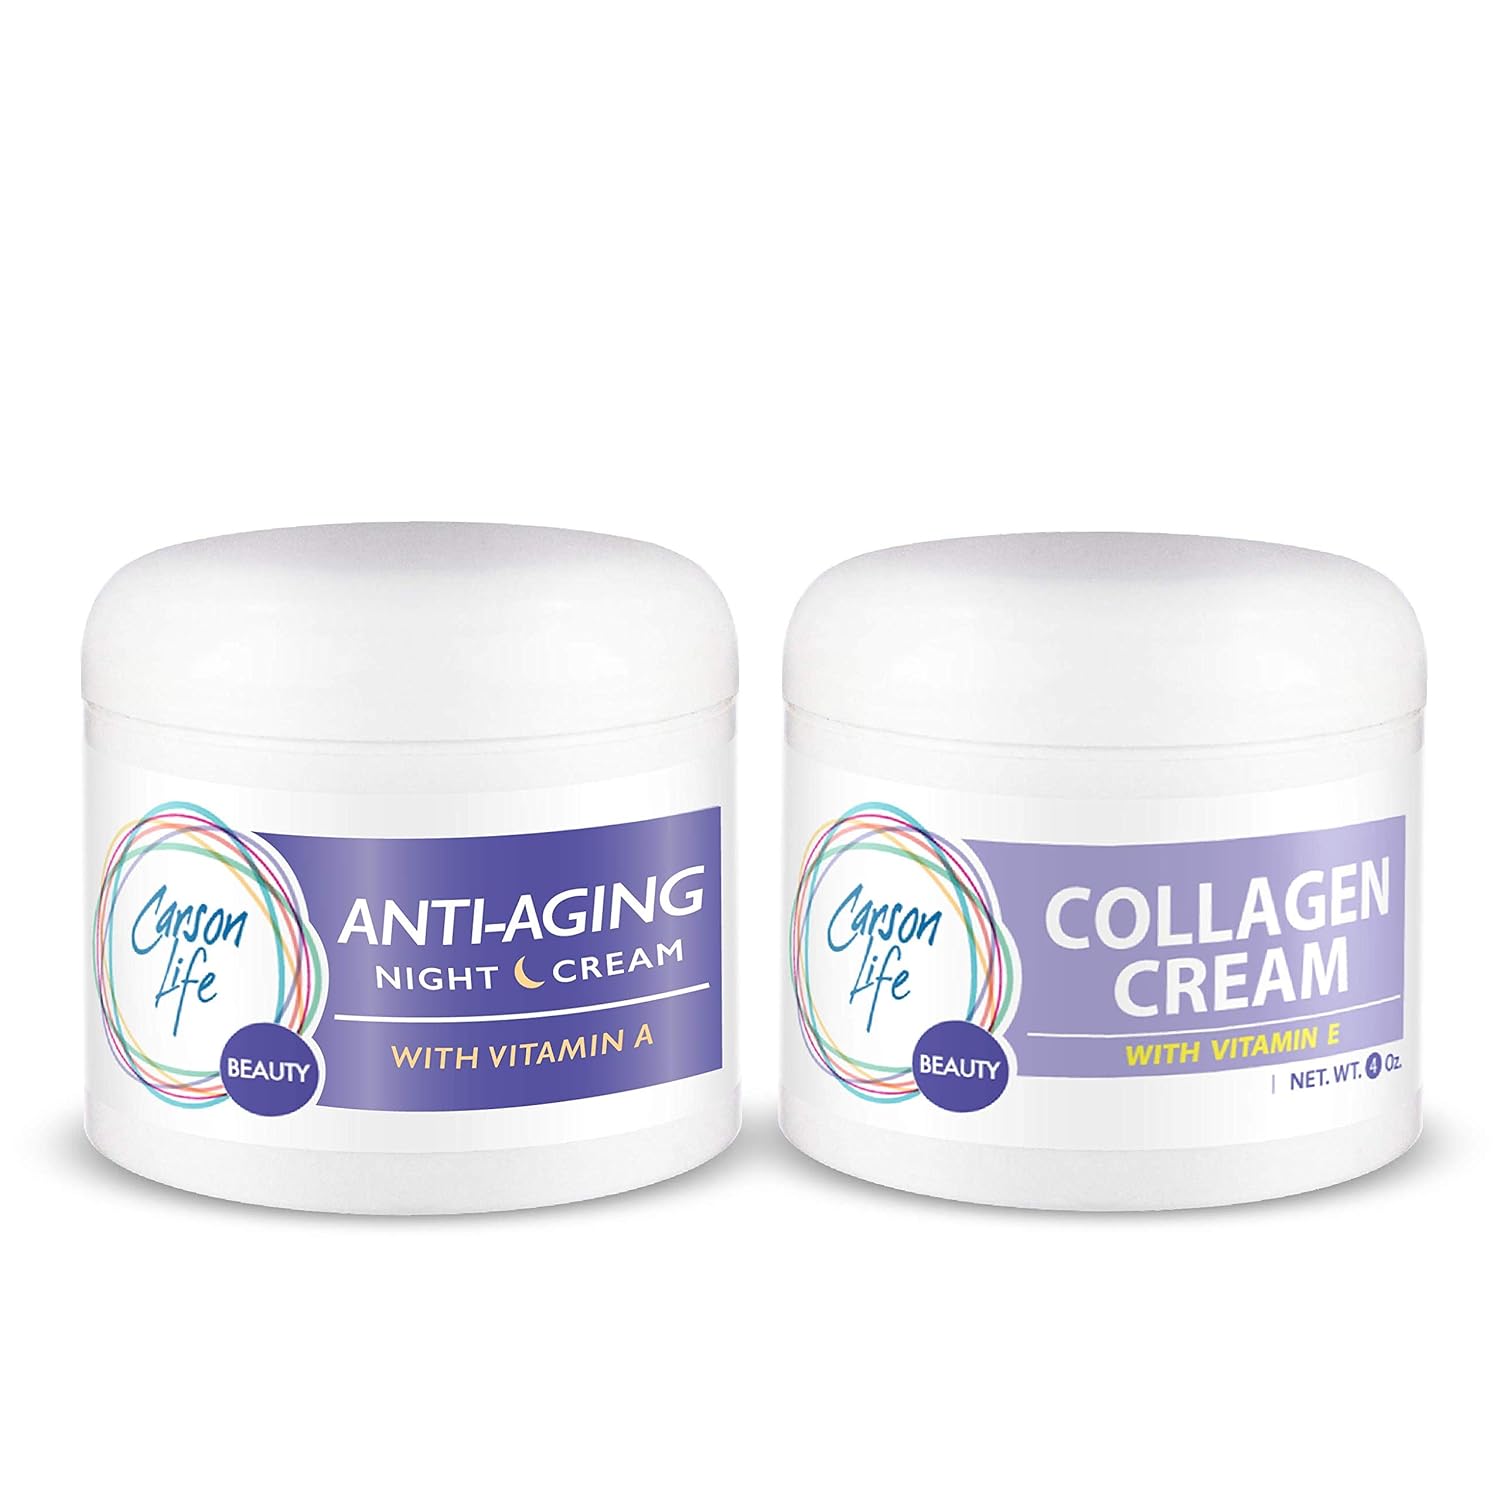 Carson Life Day & Night Kit (Collagen Beauty Cream With Vitamin E, Anti Aging Night Cream) 4  - Marvelously Rejuvenate Skin & Prevent Wrinkles - Keep Your Skin and Face Healthy - Made in the USA